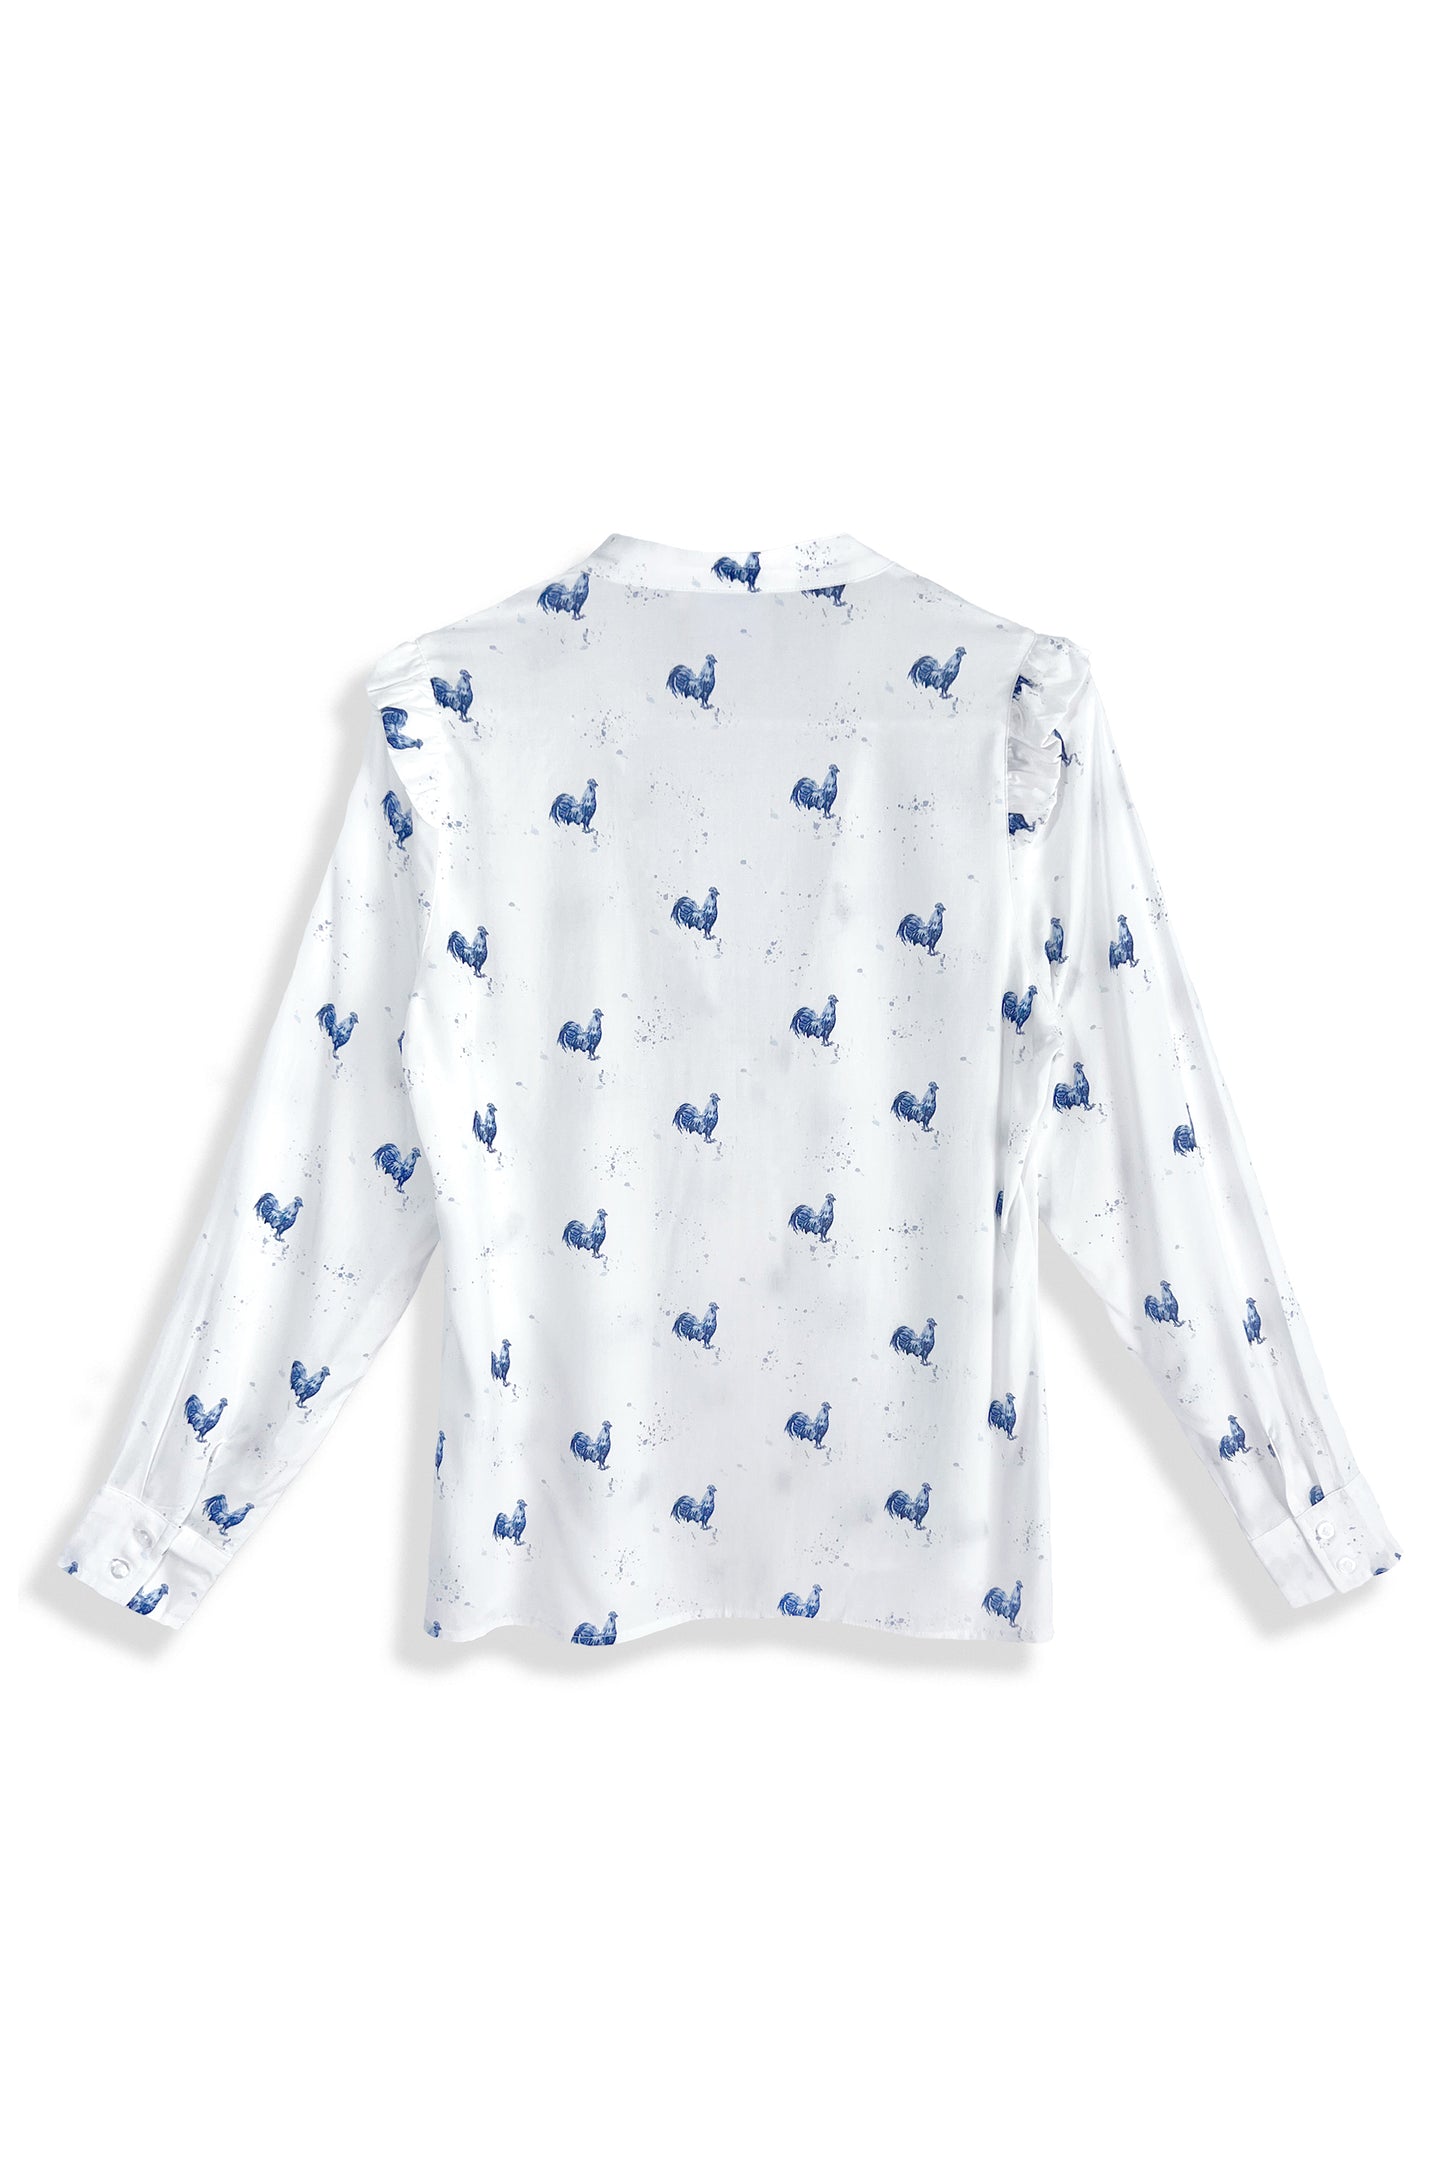 Women's Rooster Ruffle Button-up Top